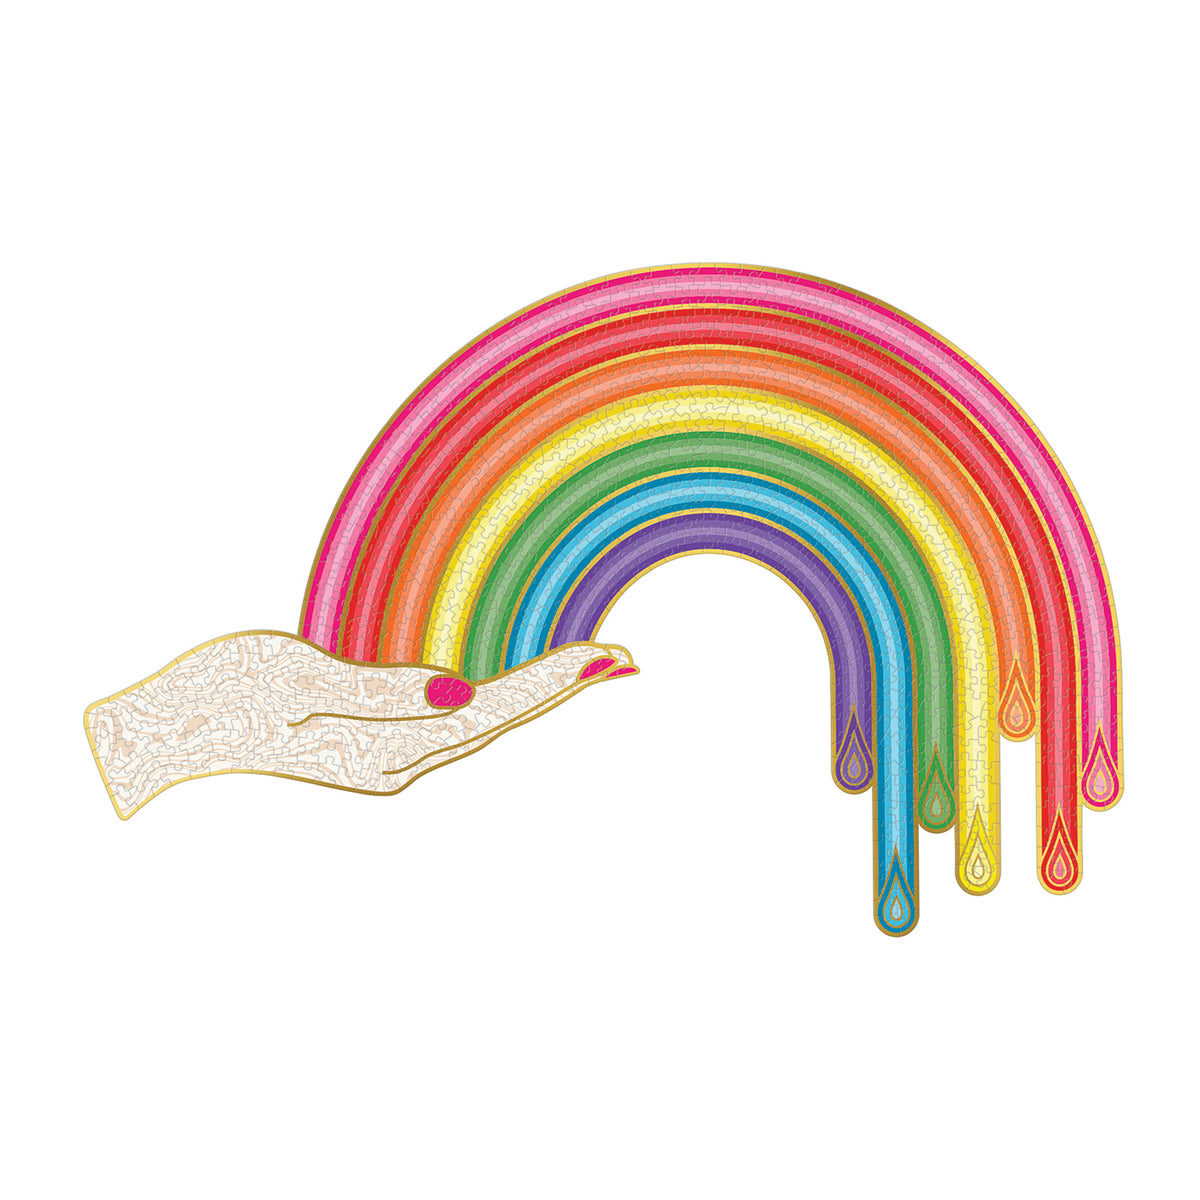 Rainbow Hand Shaped Puzzle by Jonathan Adler